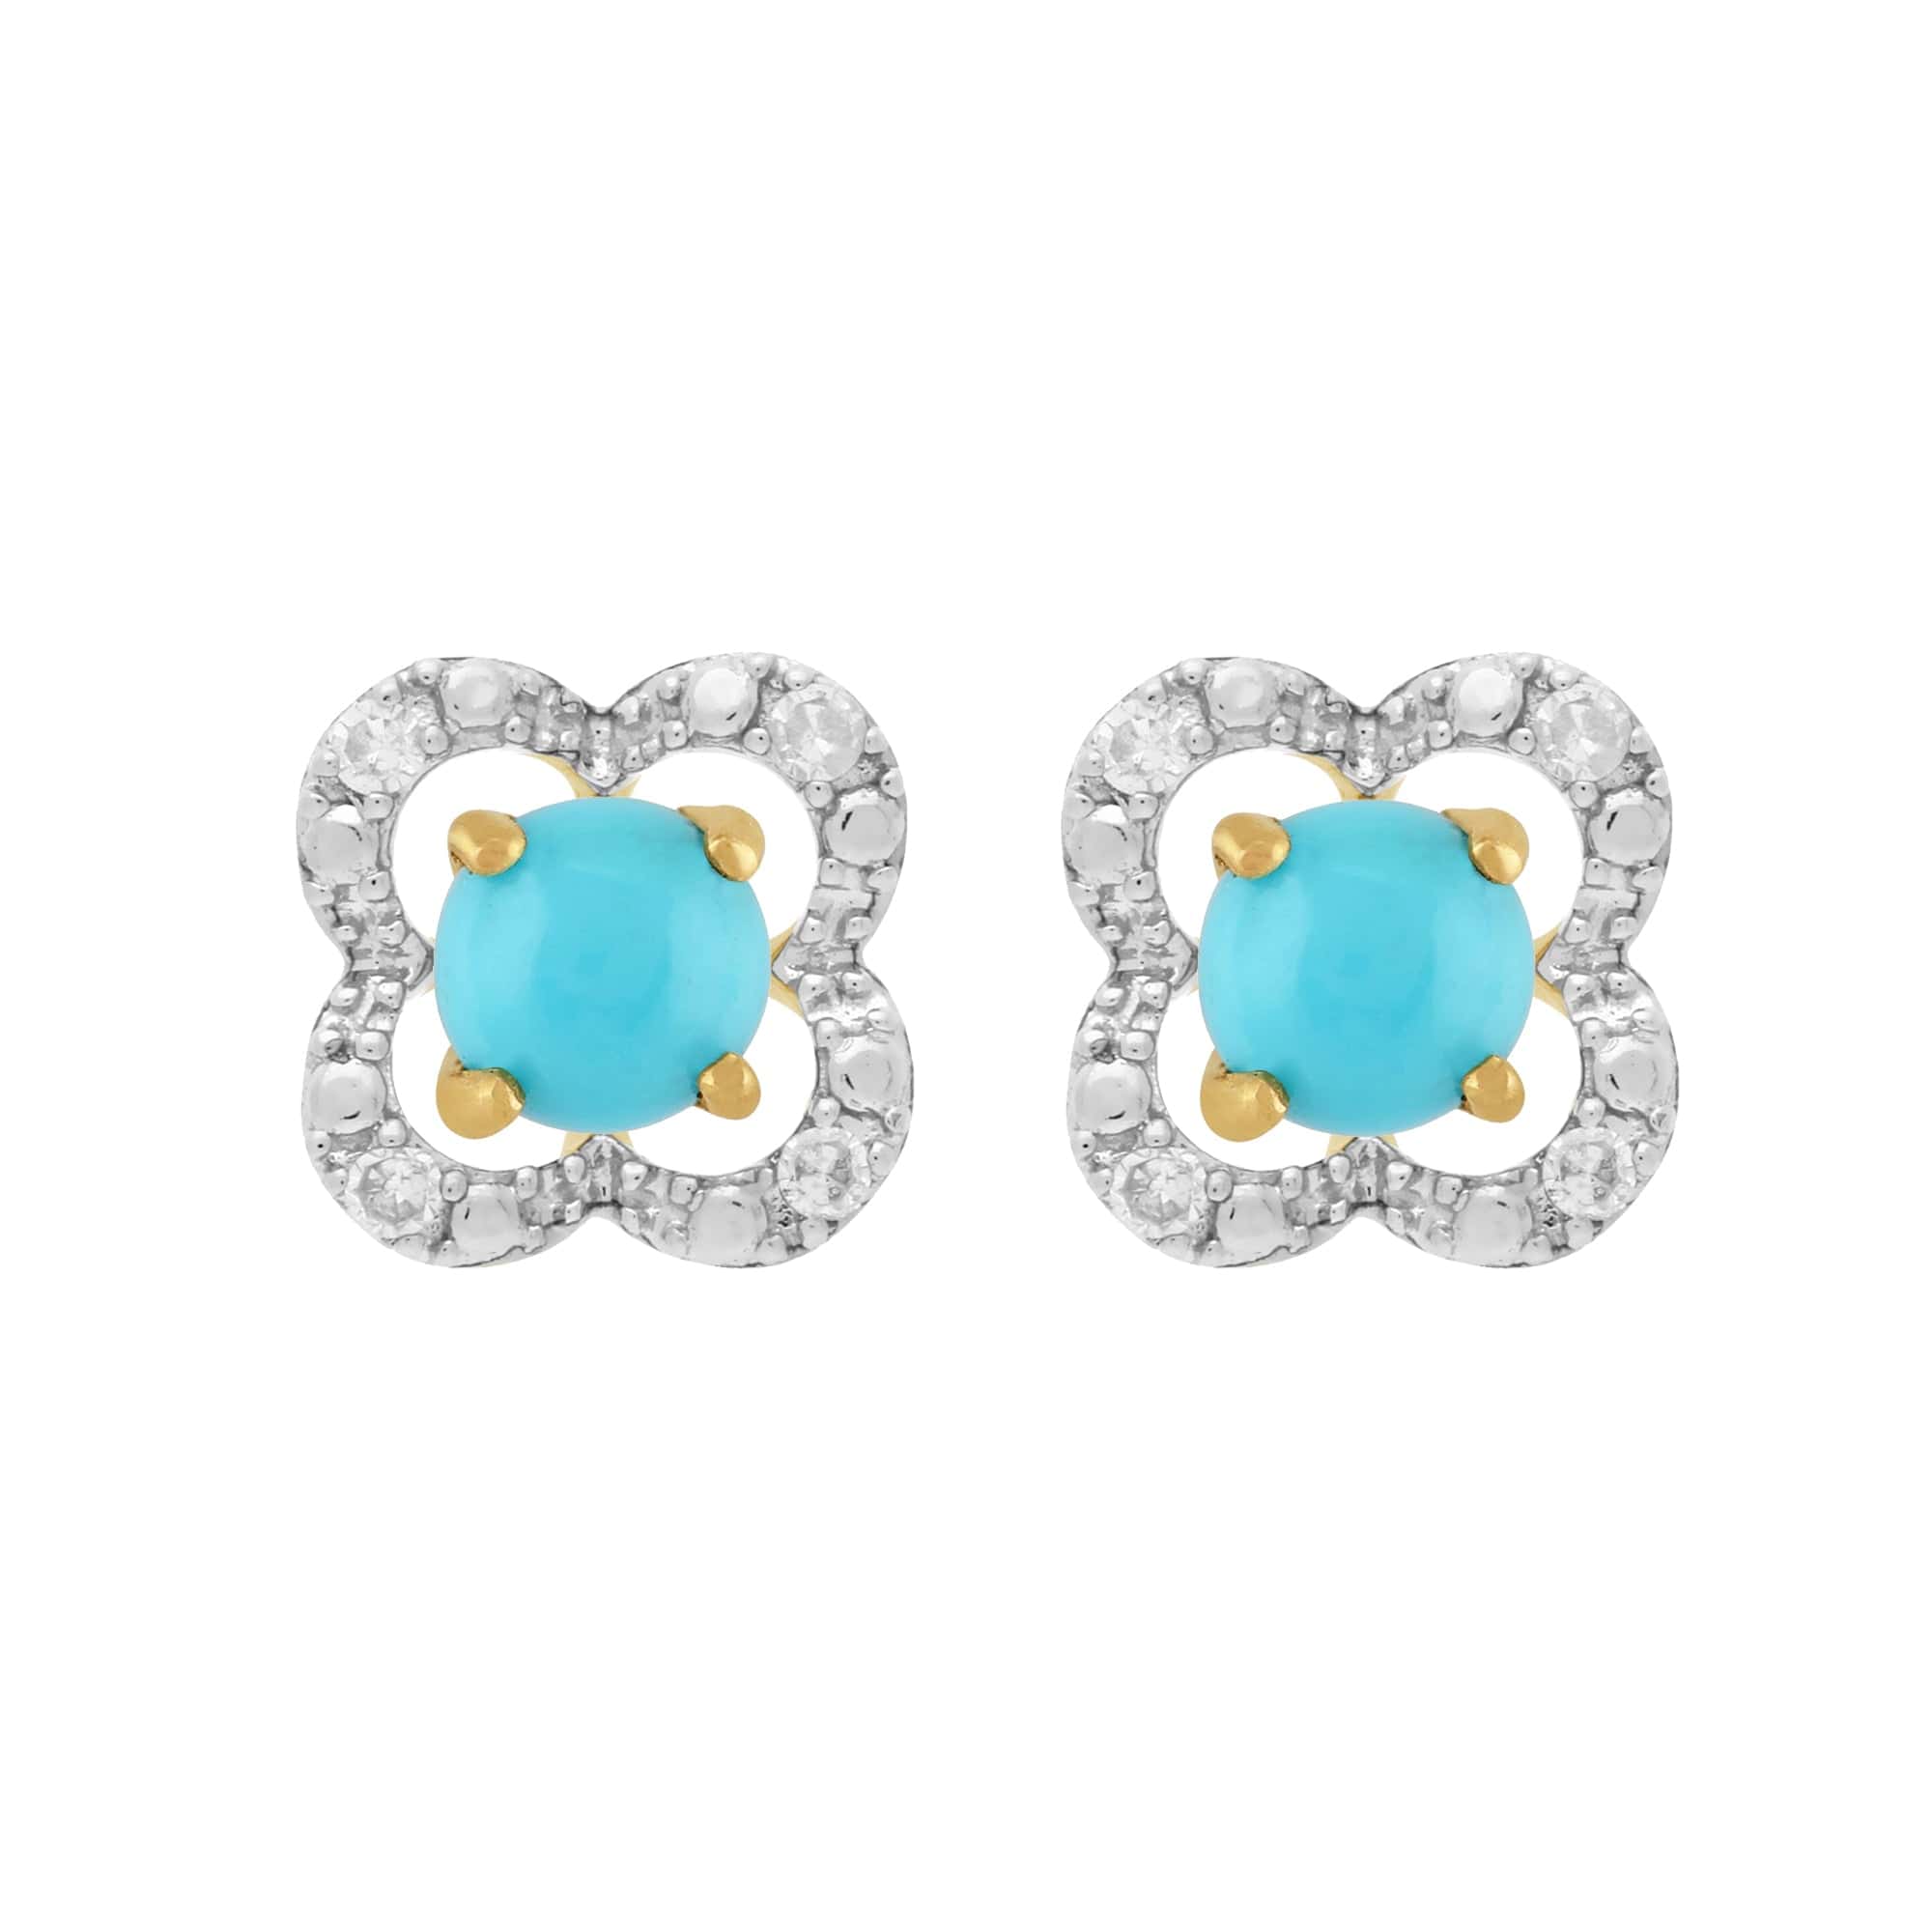 26945-191E0375019 Classic Round Turquoise Stud Earrings with Detachable Diamond Floral Ear Jacket in 9ct Yellow Gold 1